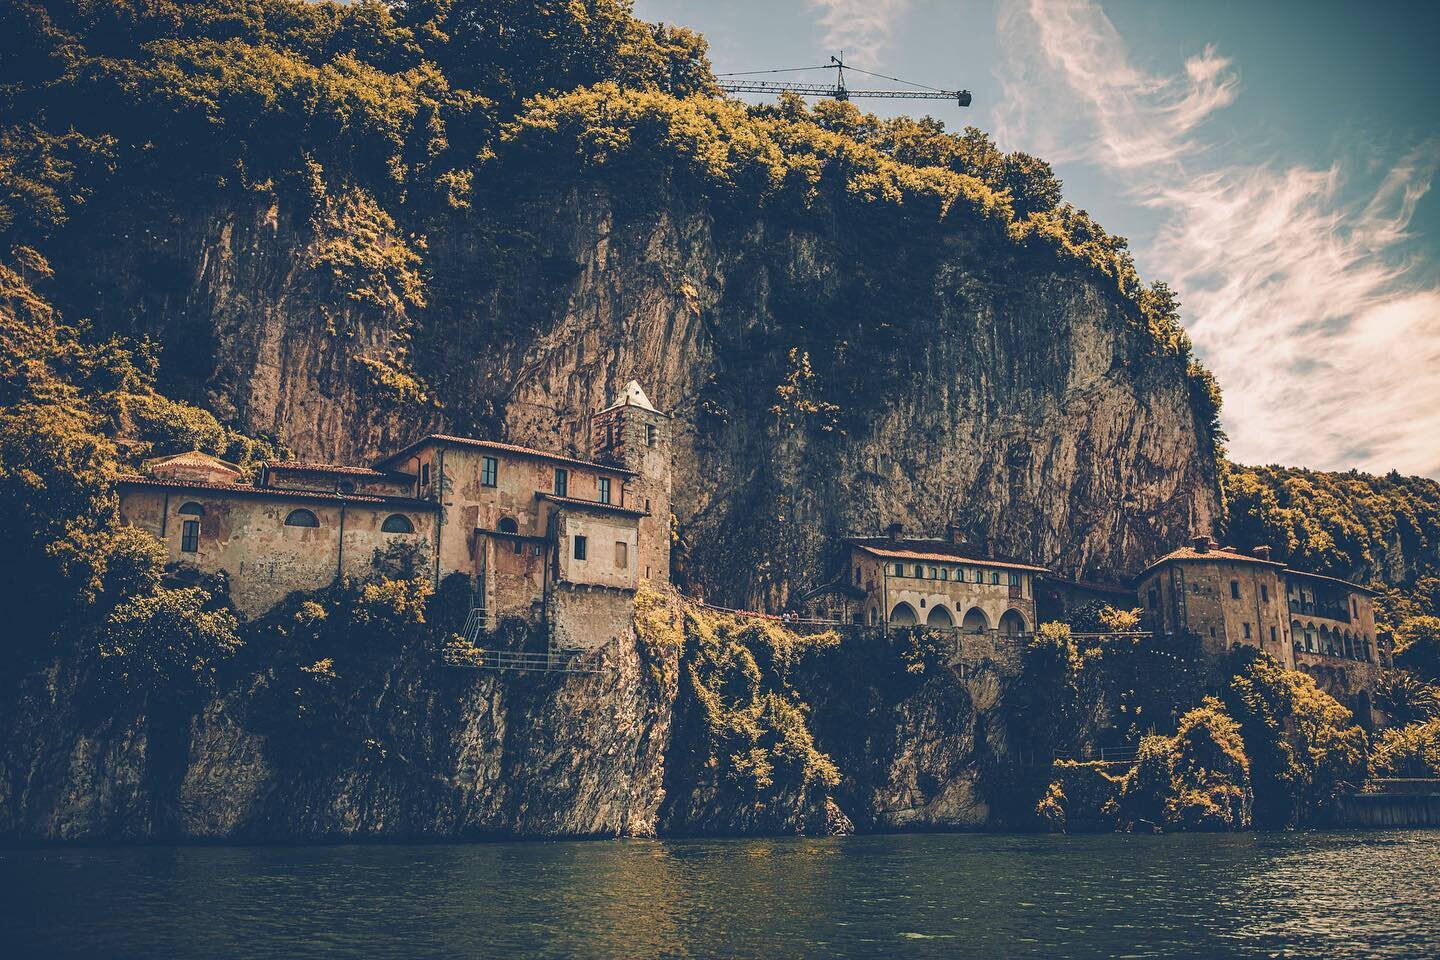 Had some good times in Italy with friends

#lagomaggiore

#visititaly #boatcruise #lago #italy #lake #italien#Contenproduction #campaign #neverstopexploring #landscape #Roadtrip #advertisingphotography #boattrip #freelancer #campaign #lovemyjob #Boat